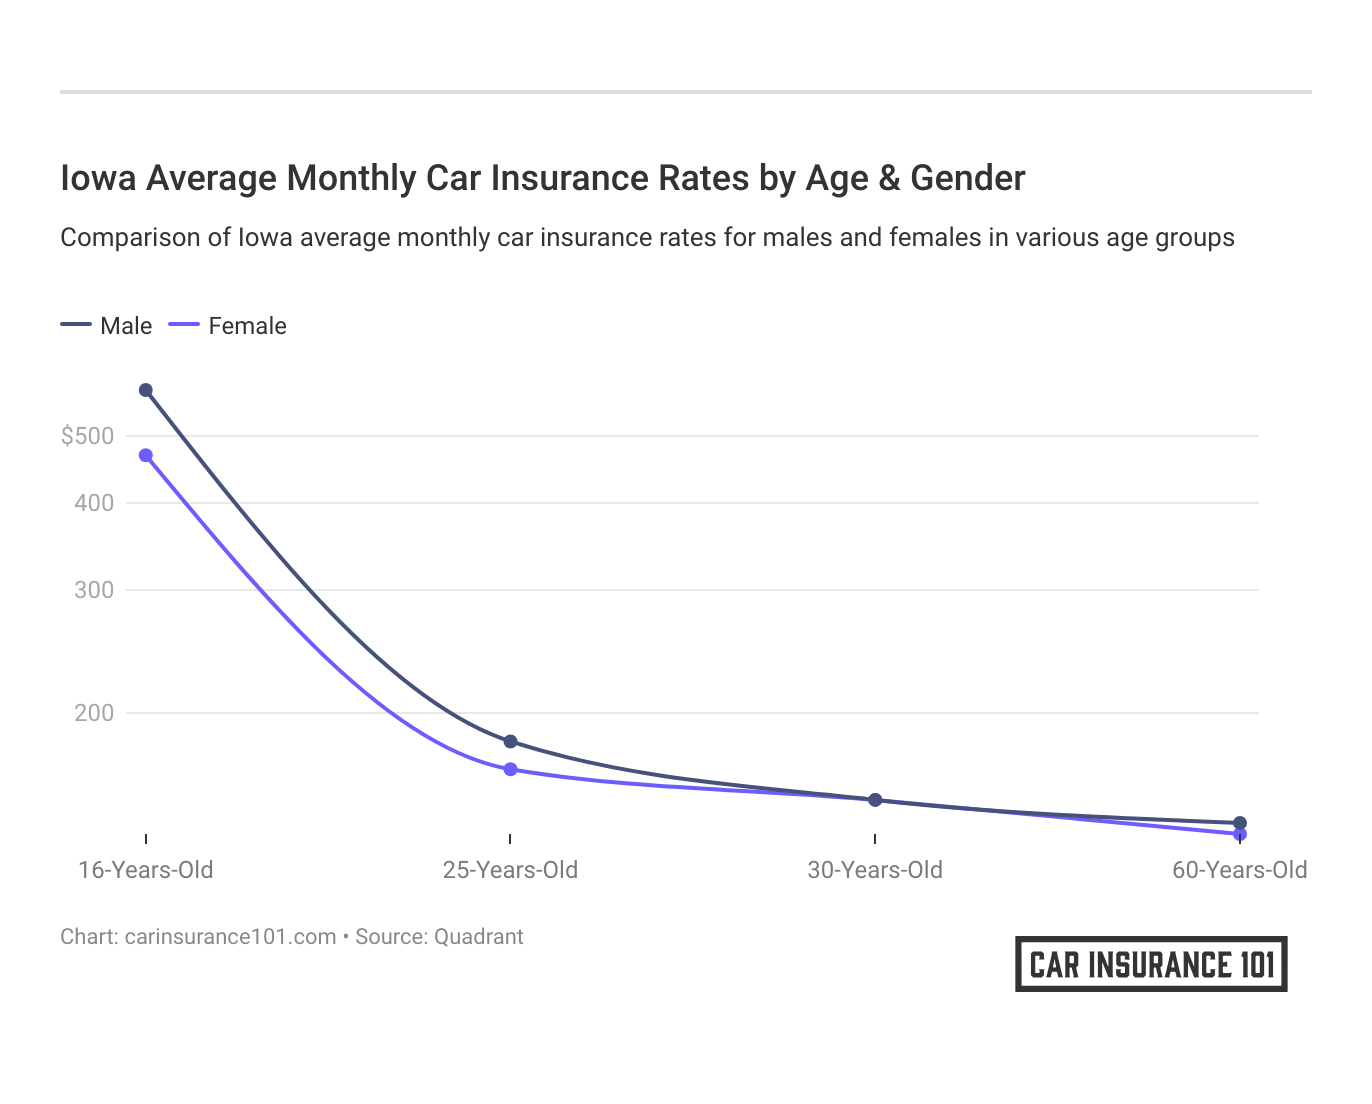 <h3>Iowa Average Monthly Car Insurance Rates by Age & Gender</h3>